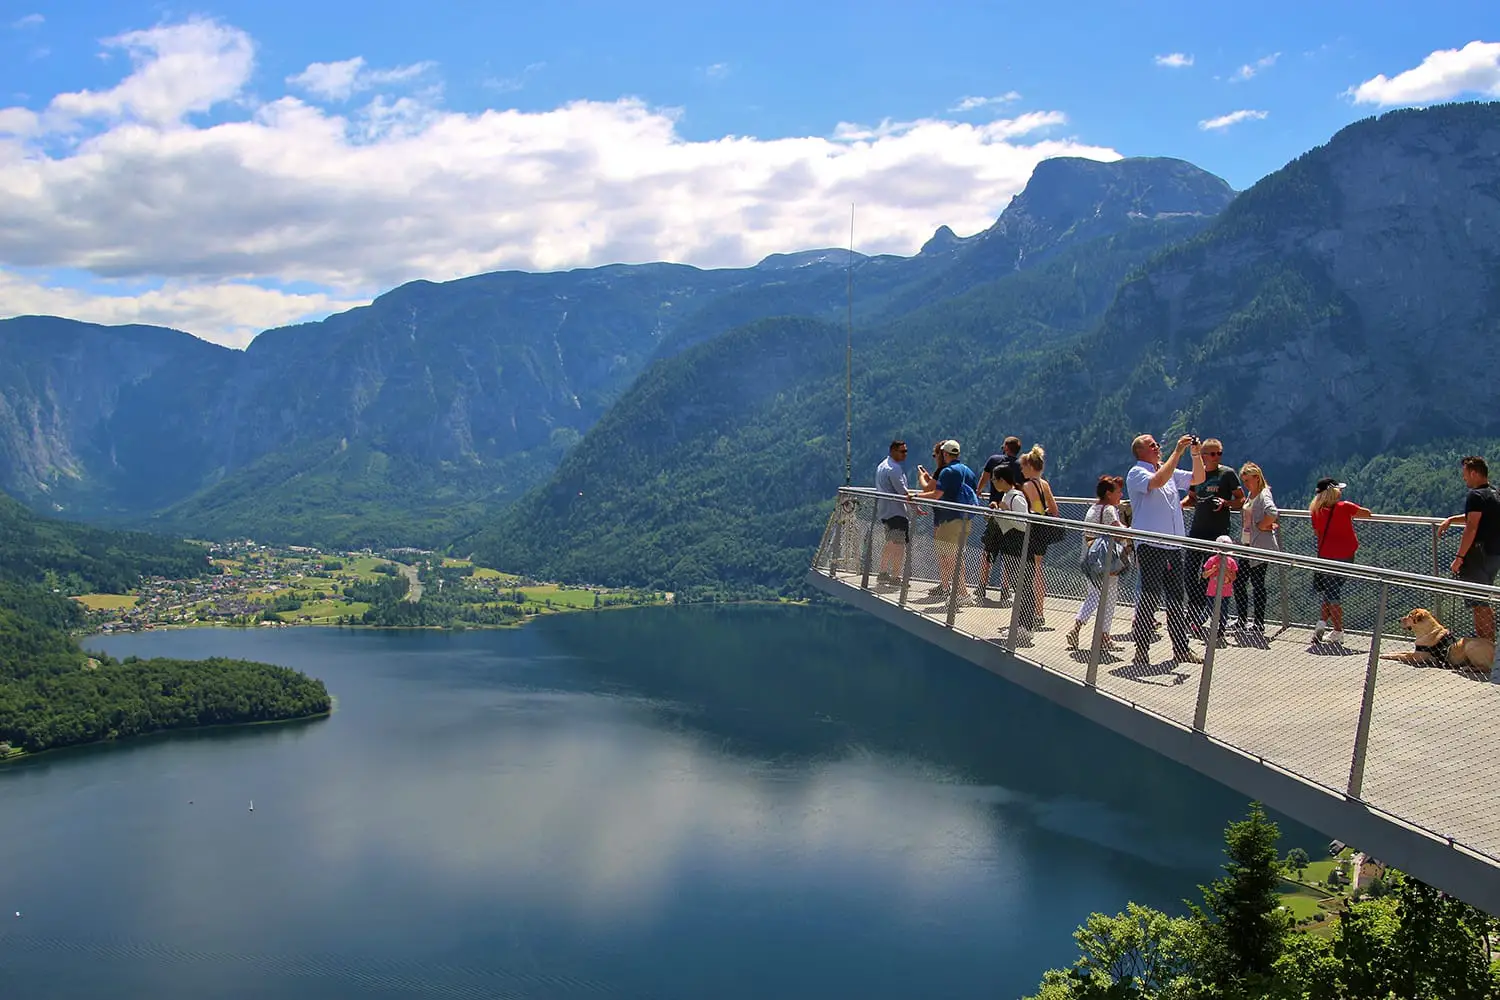 The World Heritage Viewing Platform in Hallstatt with a spectacular view of Lake Hallstatter See and the surrounding mountains Hallstatt, Austria